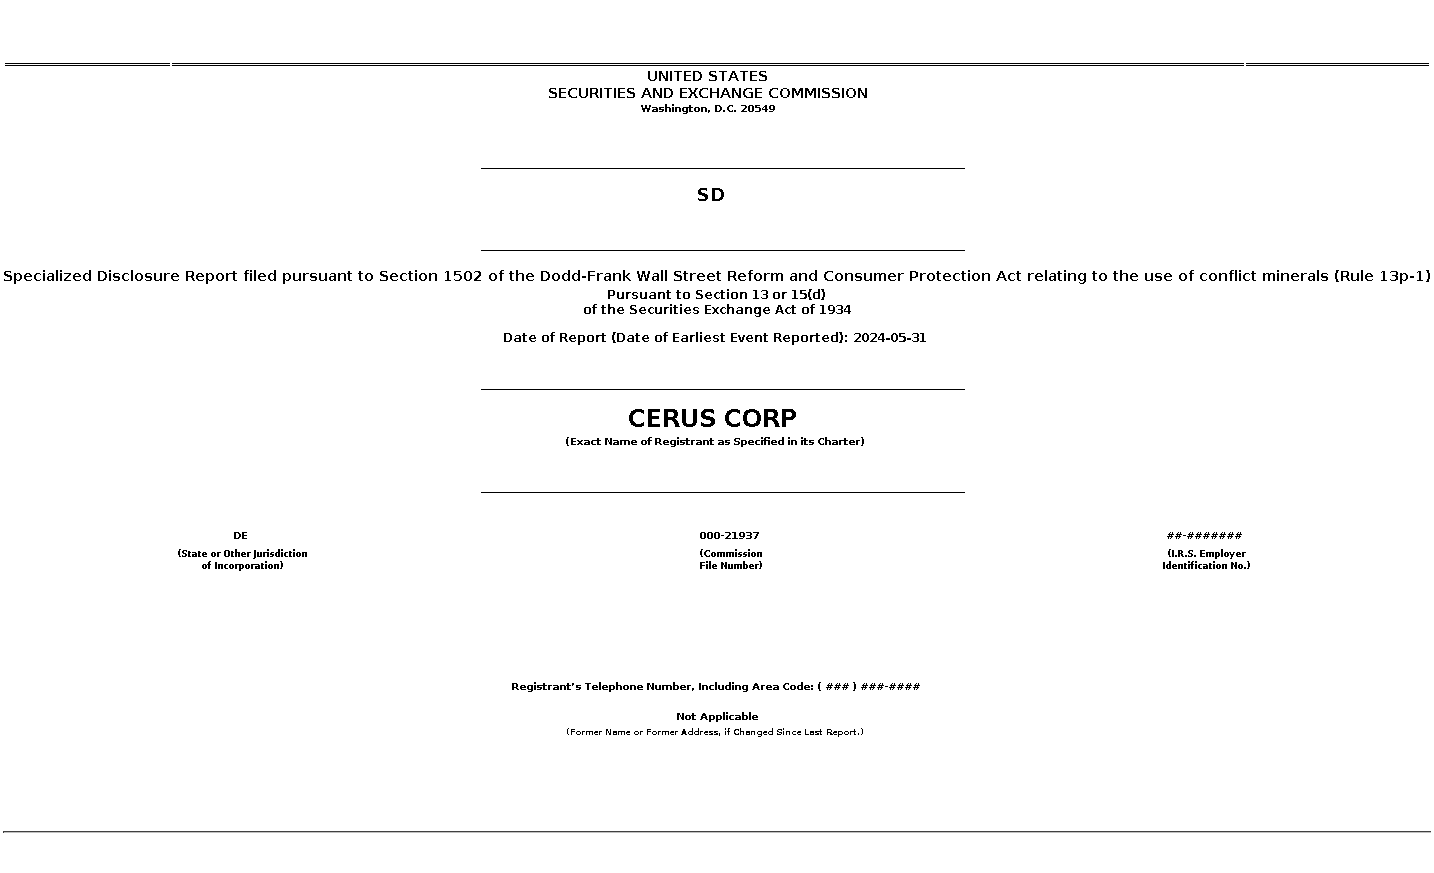 CERS : SD Specialized Disclosure Report filed pursuant to Section 1502 of the Dodd-Frank Wall Street Reform and Consumer Protection Act relating to the use of conflict minerals (Rule 13p-1)